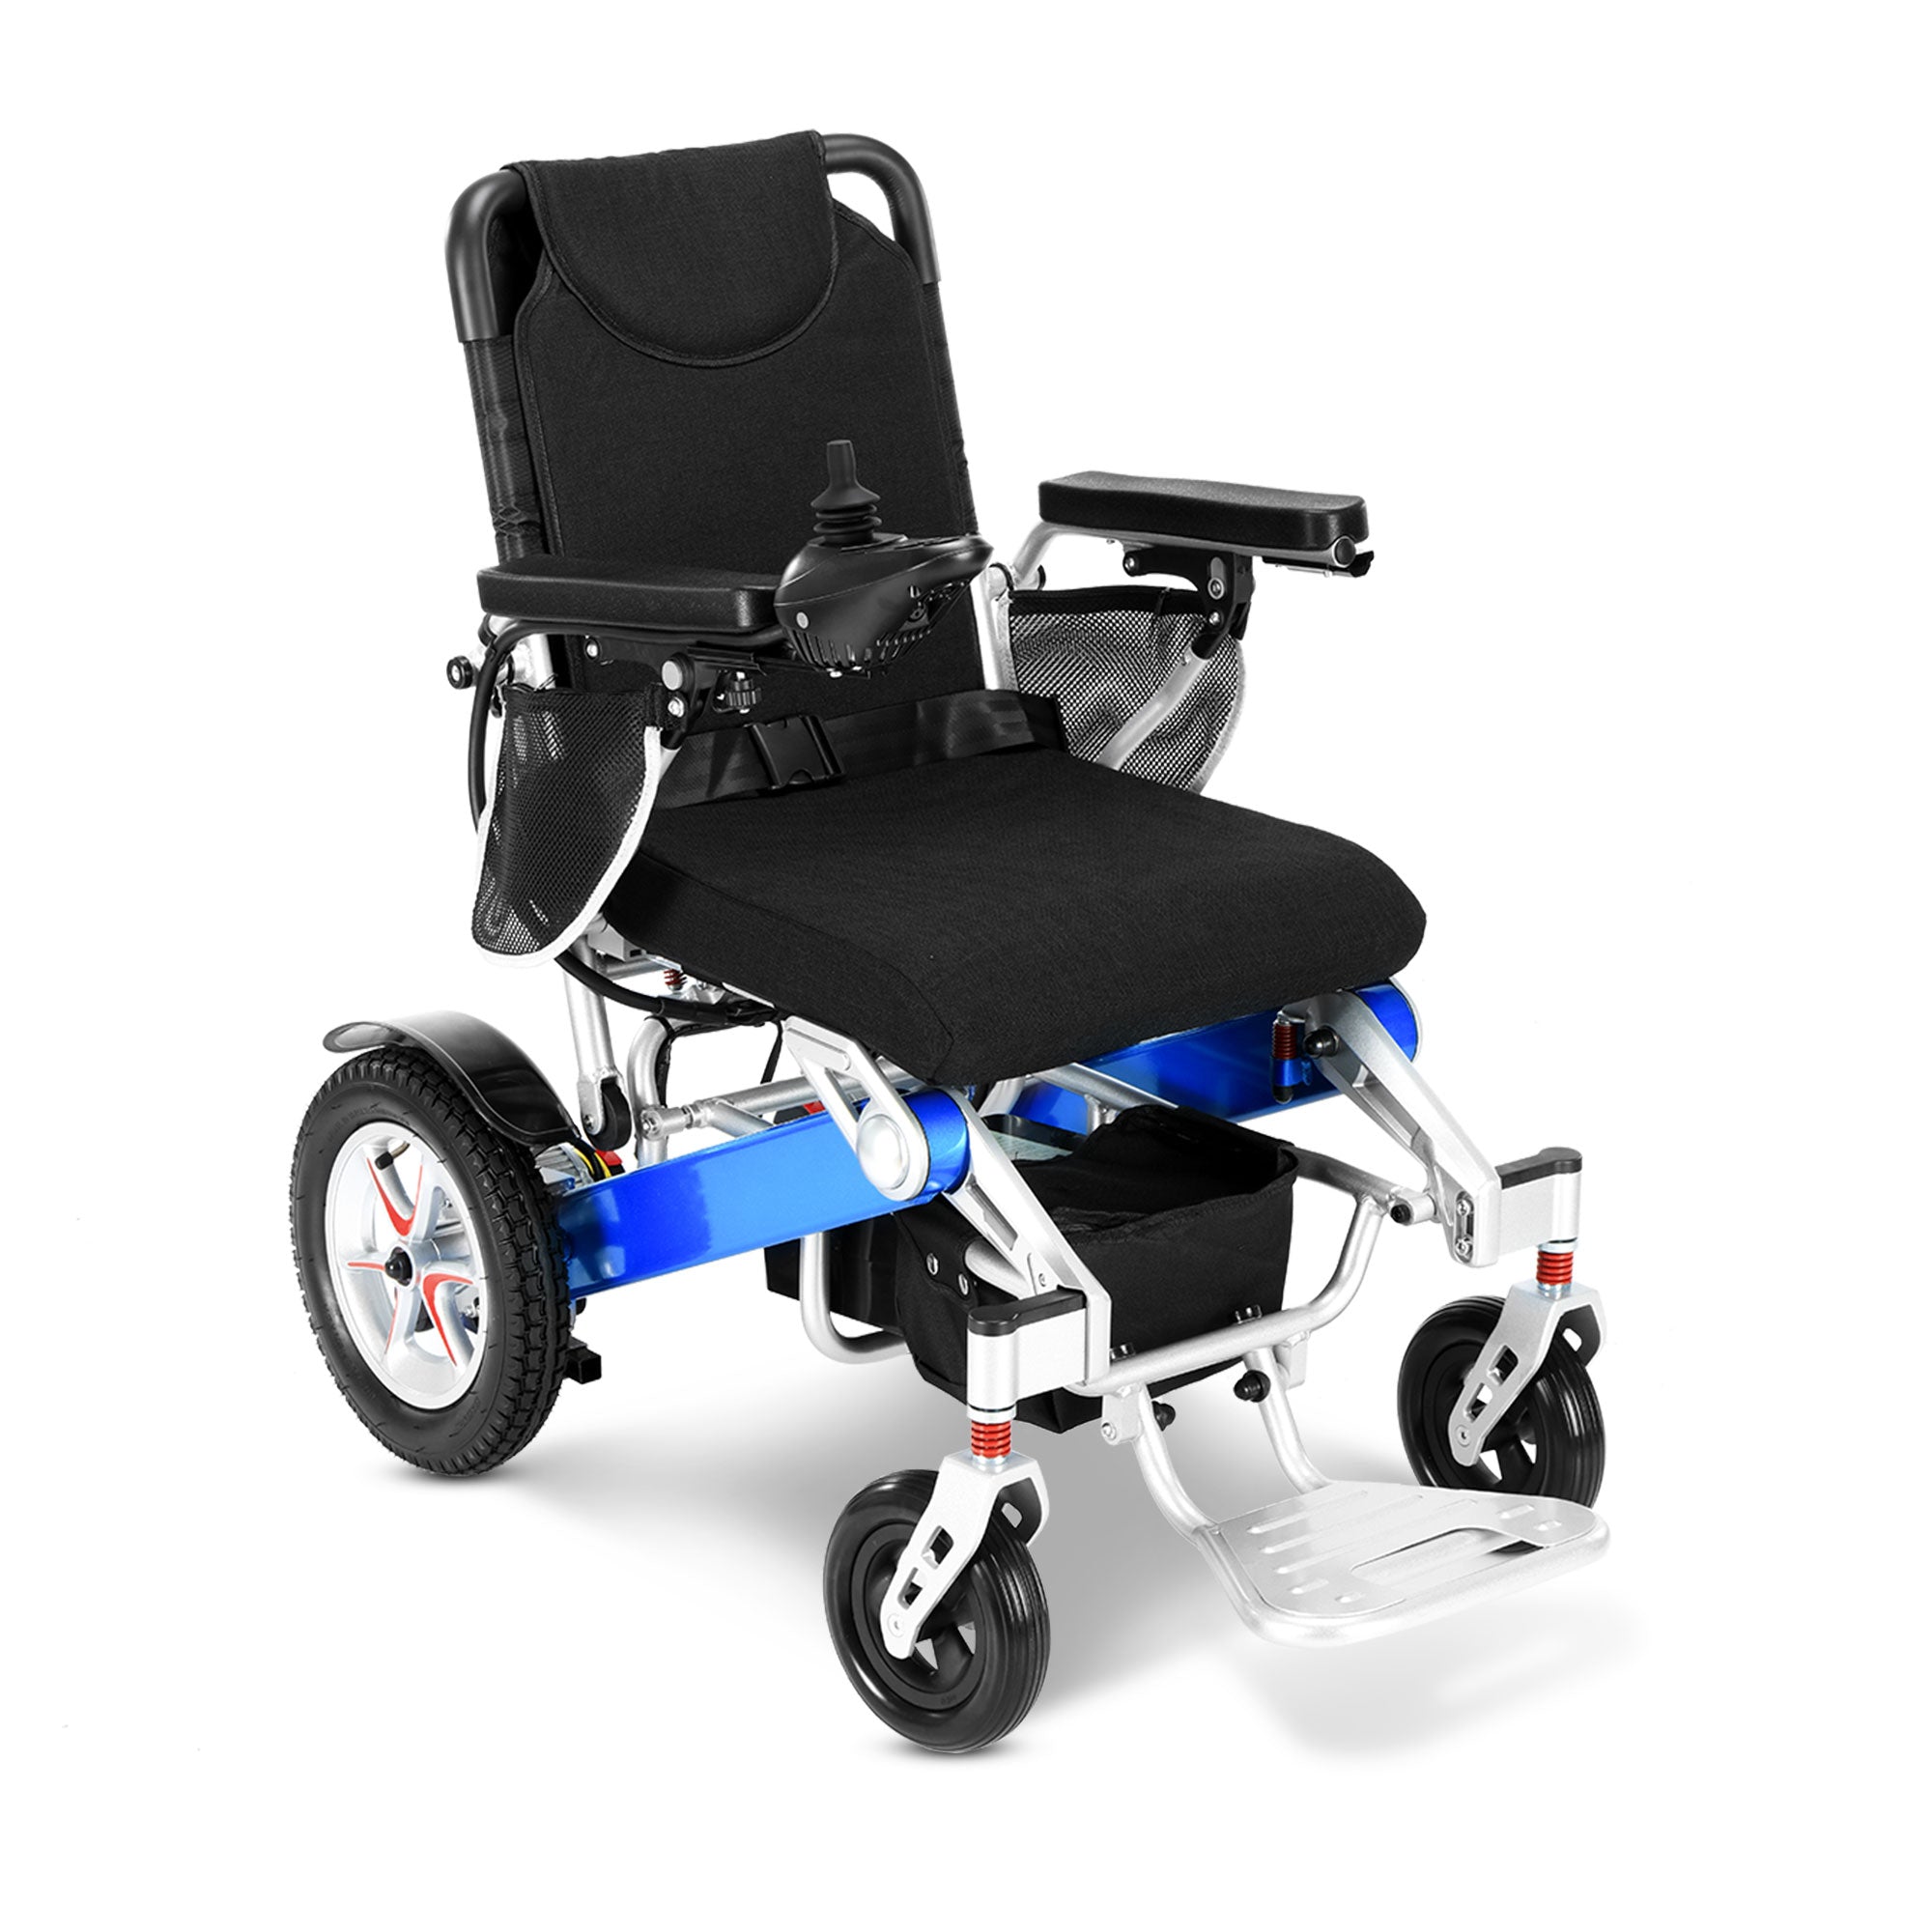 Rubicon DX09 - Deluxe Long-Range Electric Wheelchair - Blue